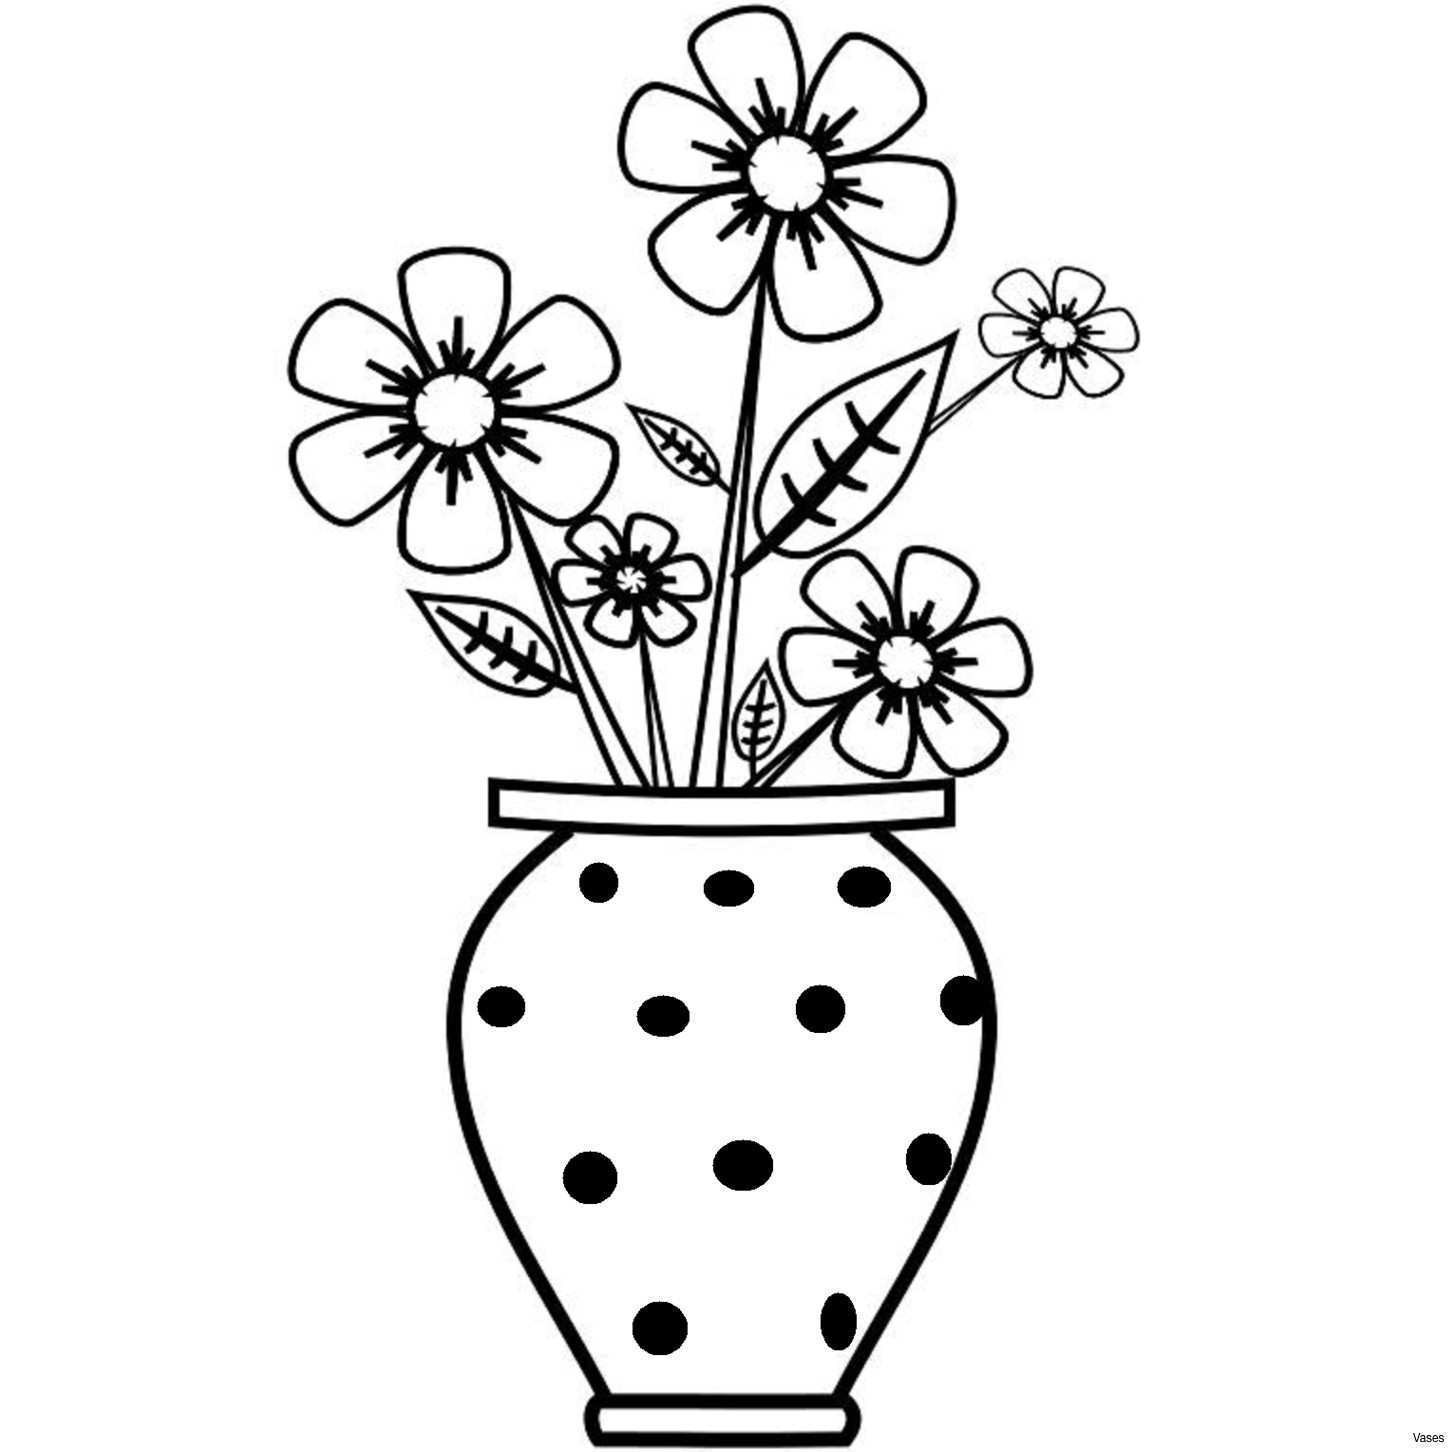 Flowers In A Vase Of Black and White Art Inspirational Will Clipart Colored Flower Vase Regarding Black and White Art Inspirational Will Clipart Colored Flower Vase Clip Arth Vases Art Infoi 0d